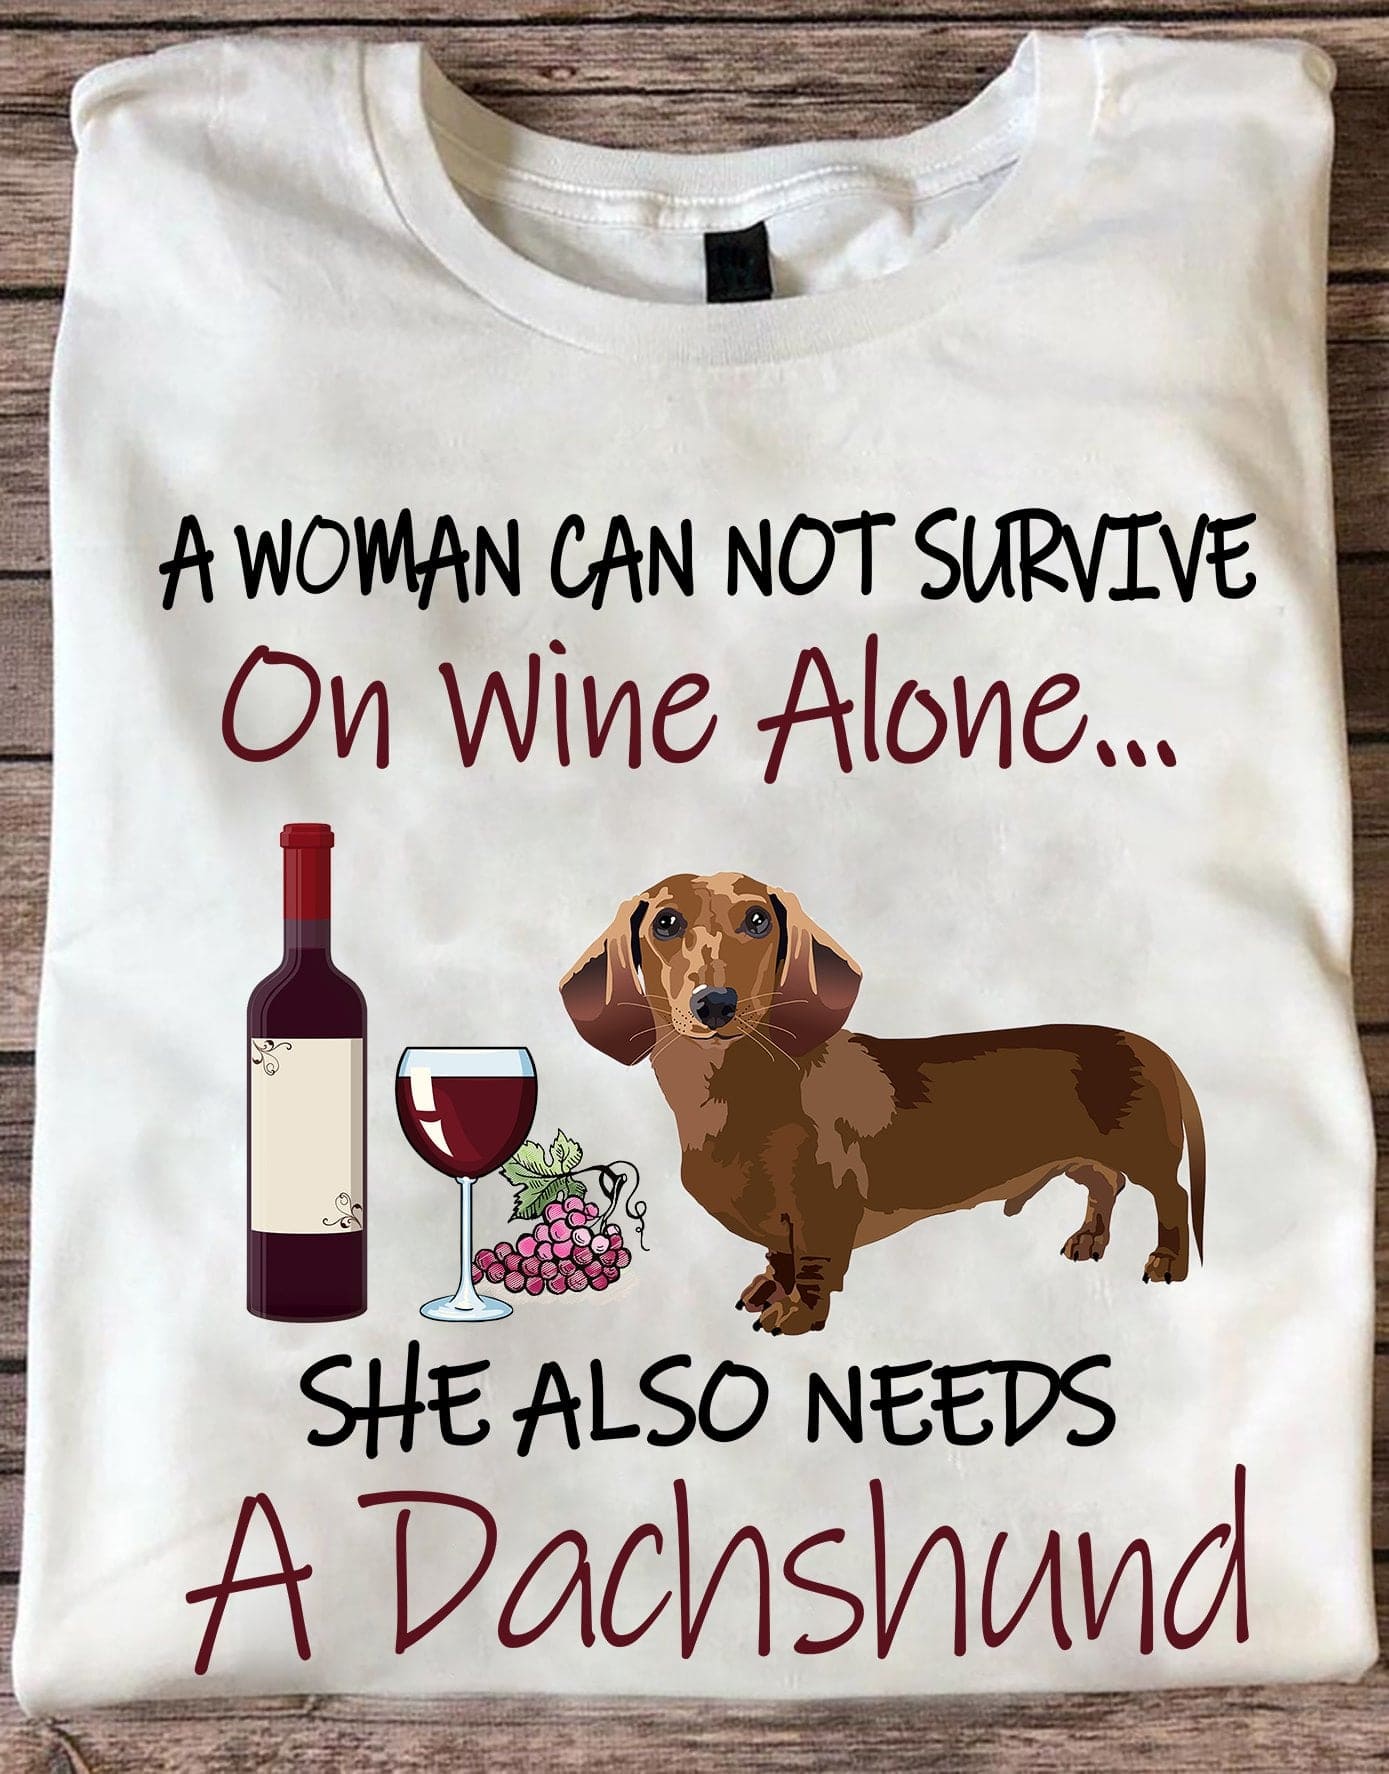 Wine Dachshund - A woman can not survive on wine alone she also needs a dachshund